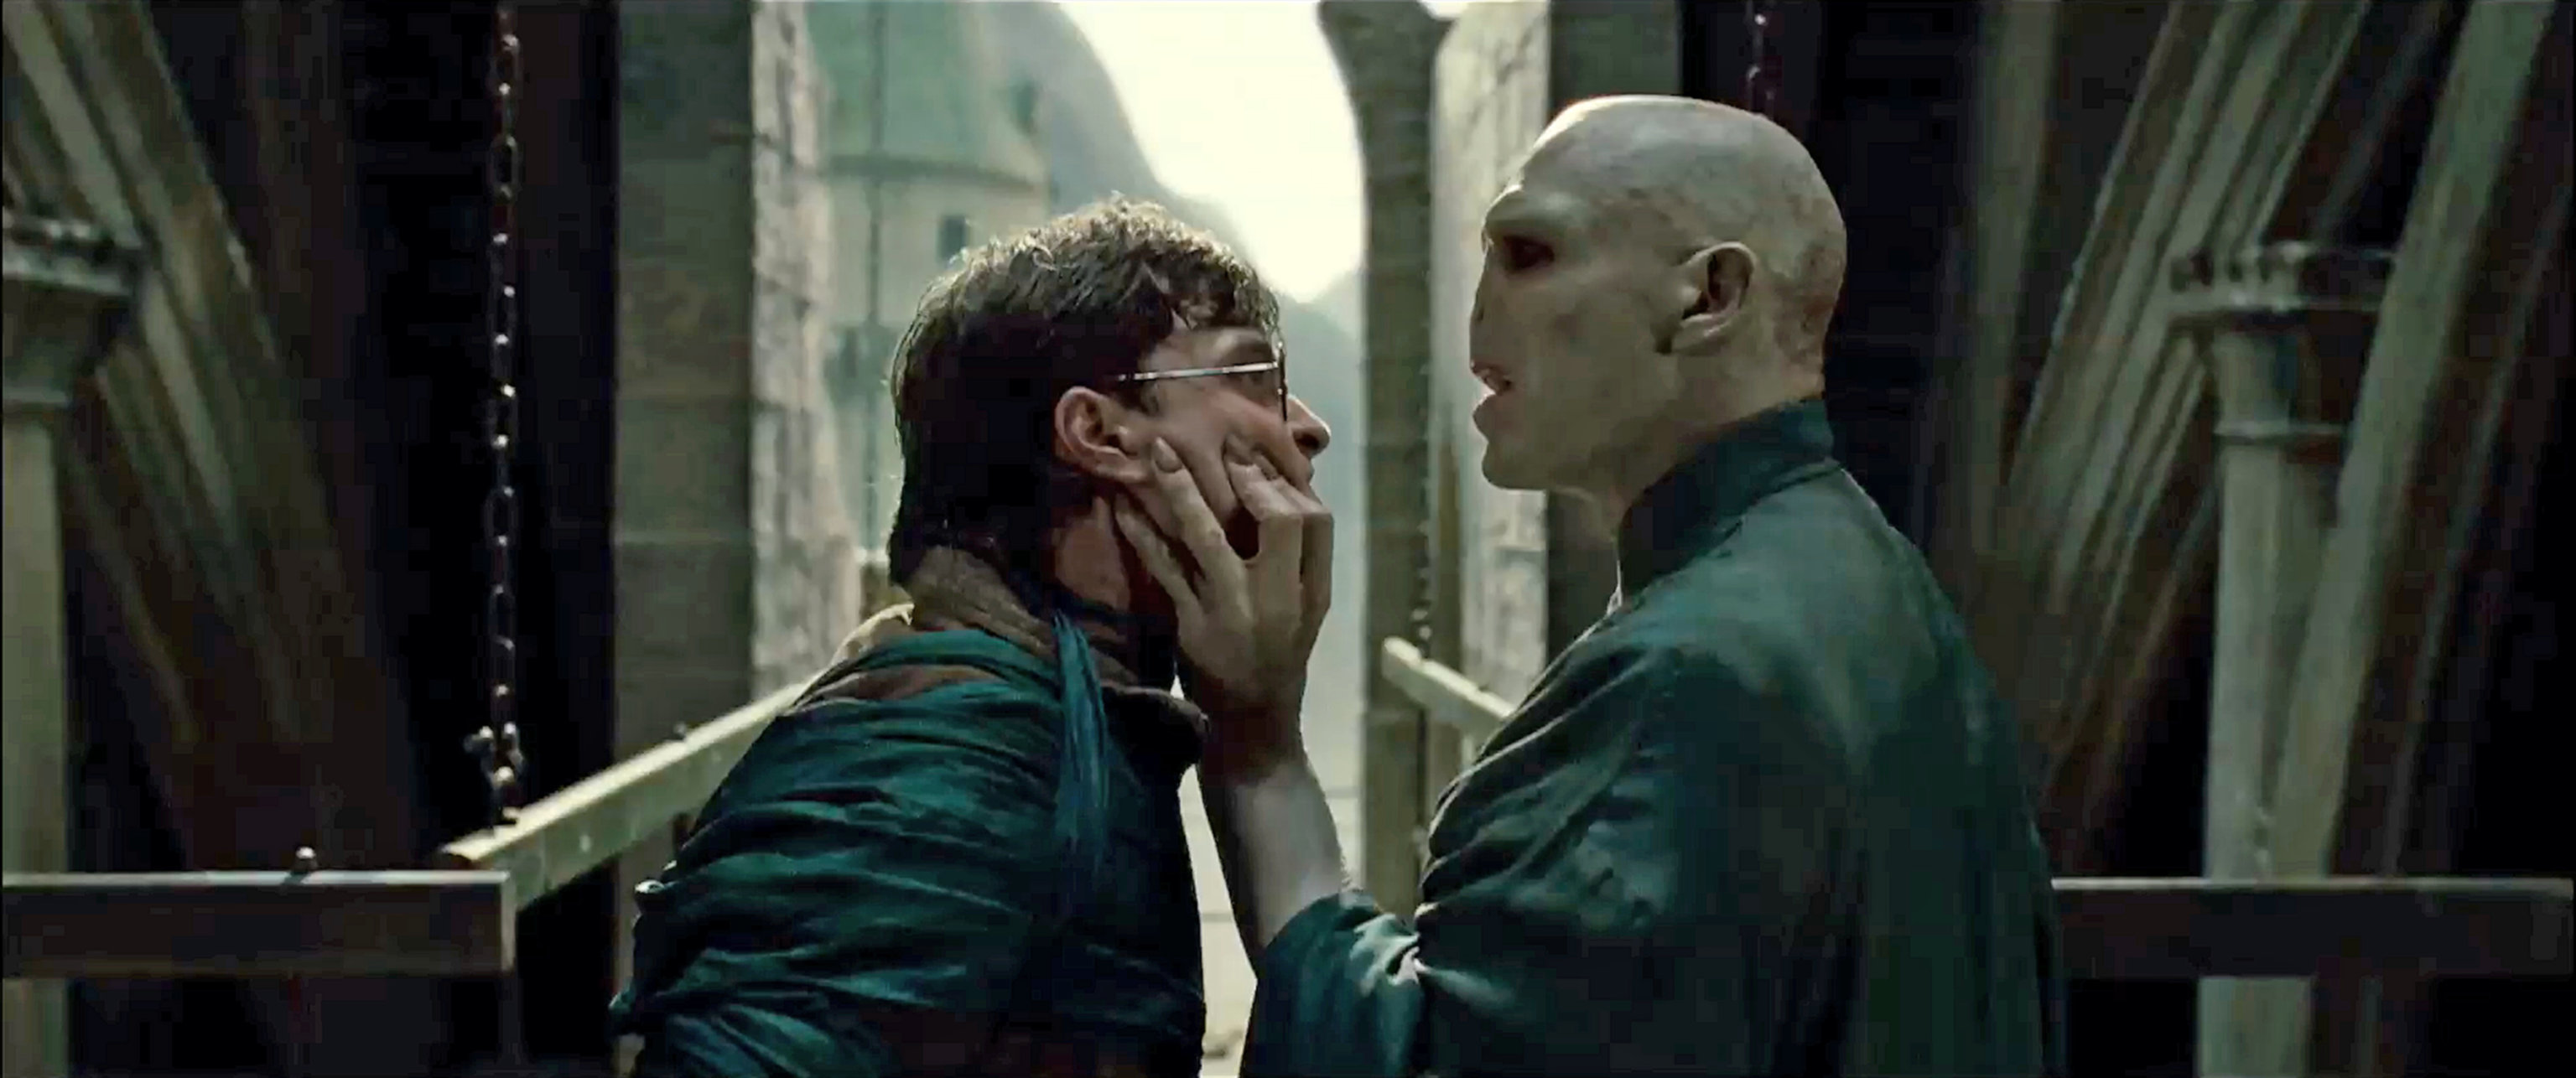 Things You May Not Have Noticed About Lord Voldemort Wizarding World